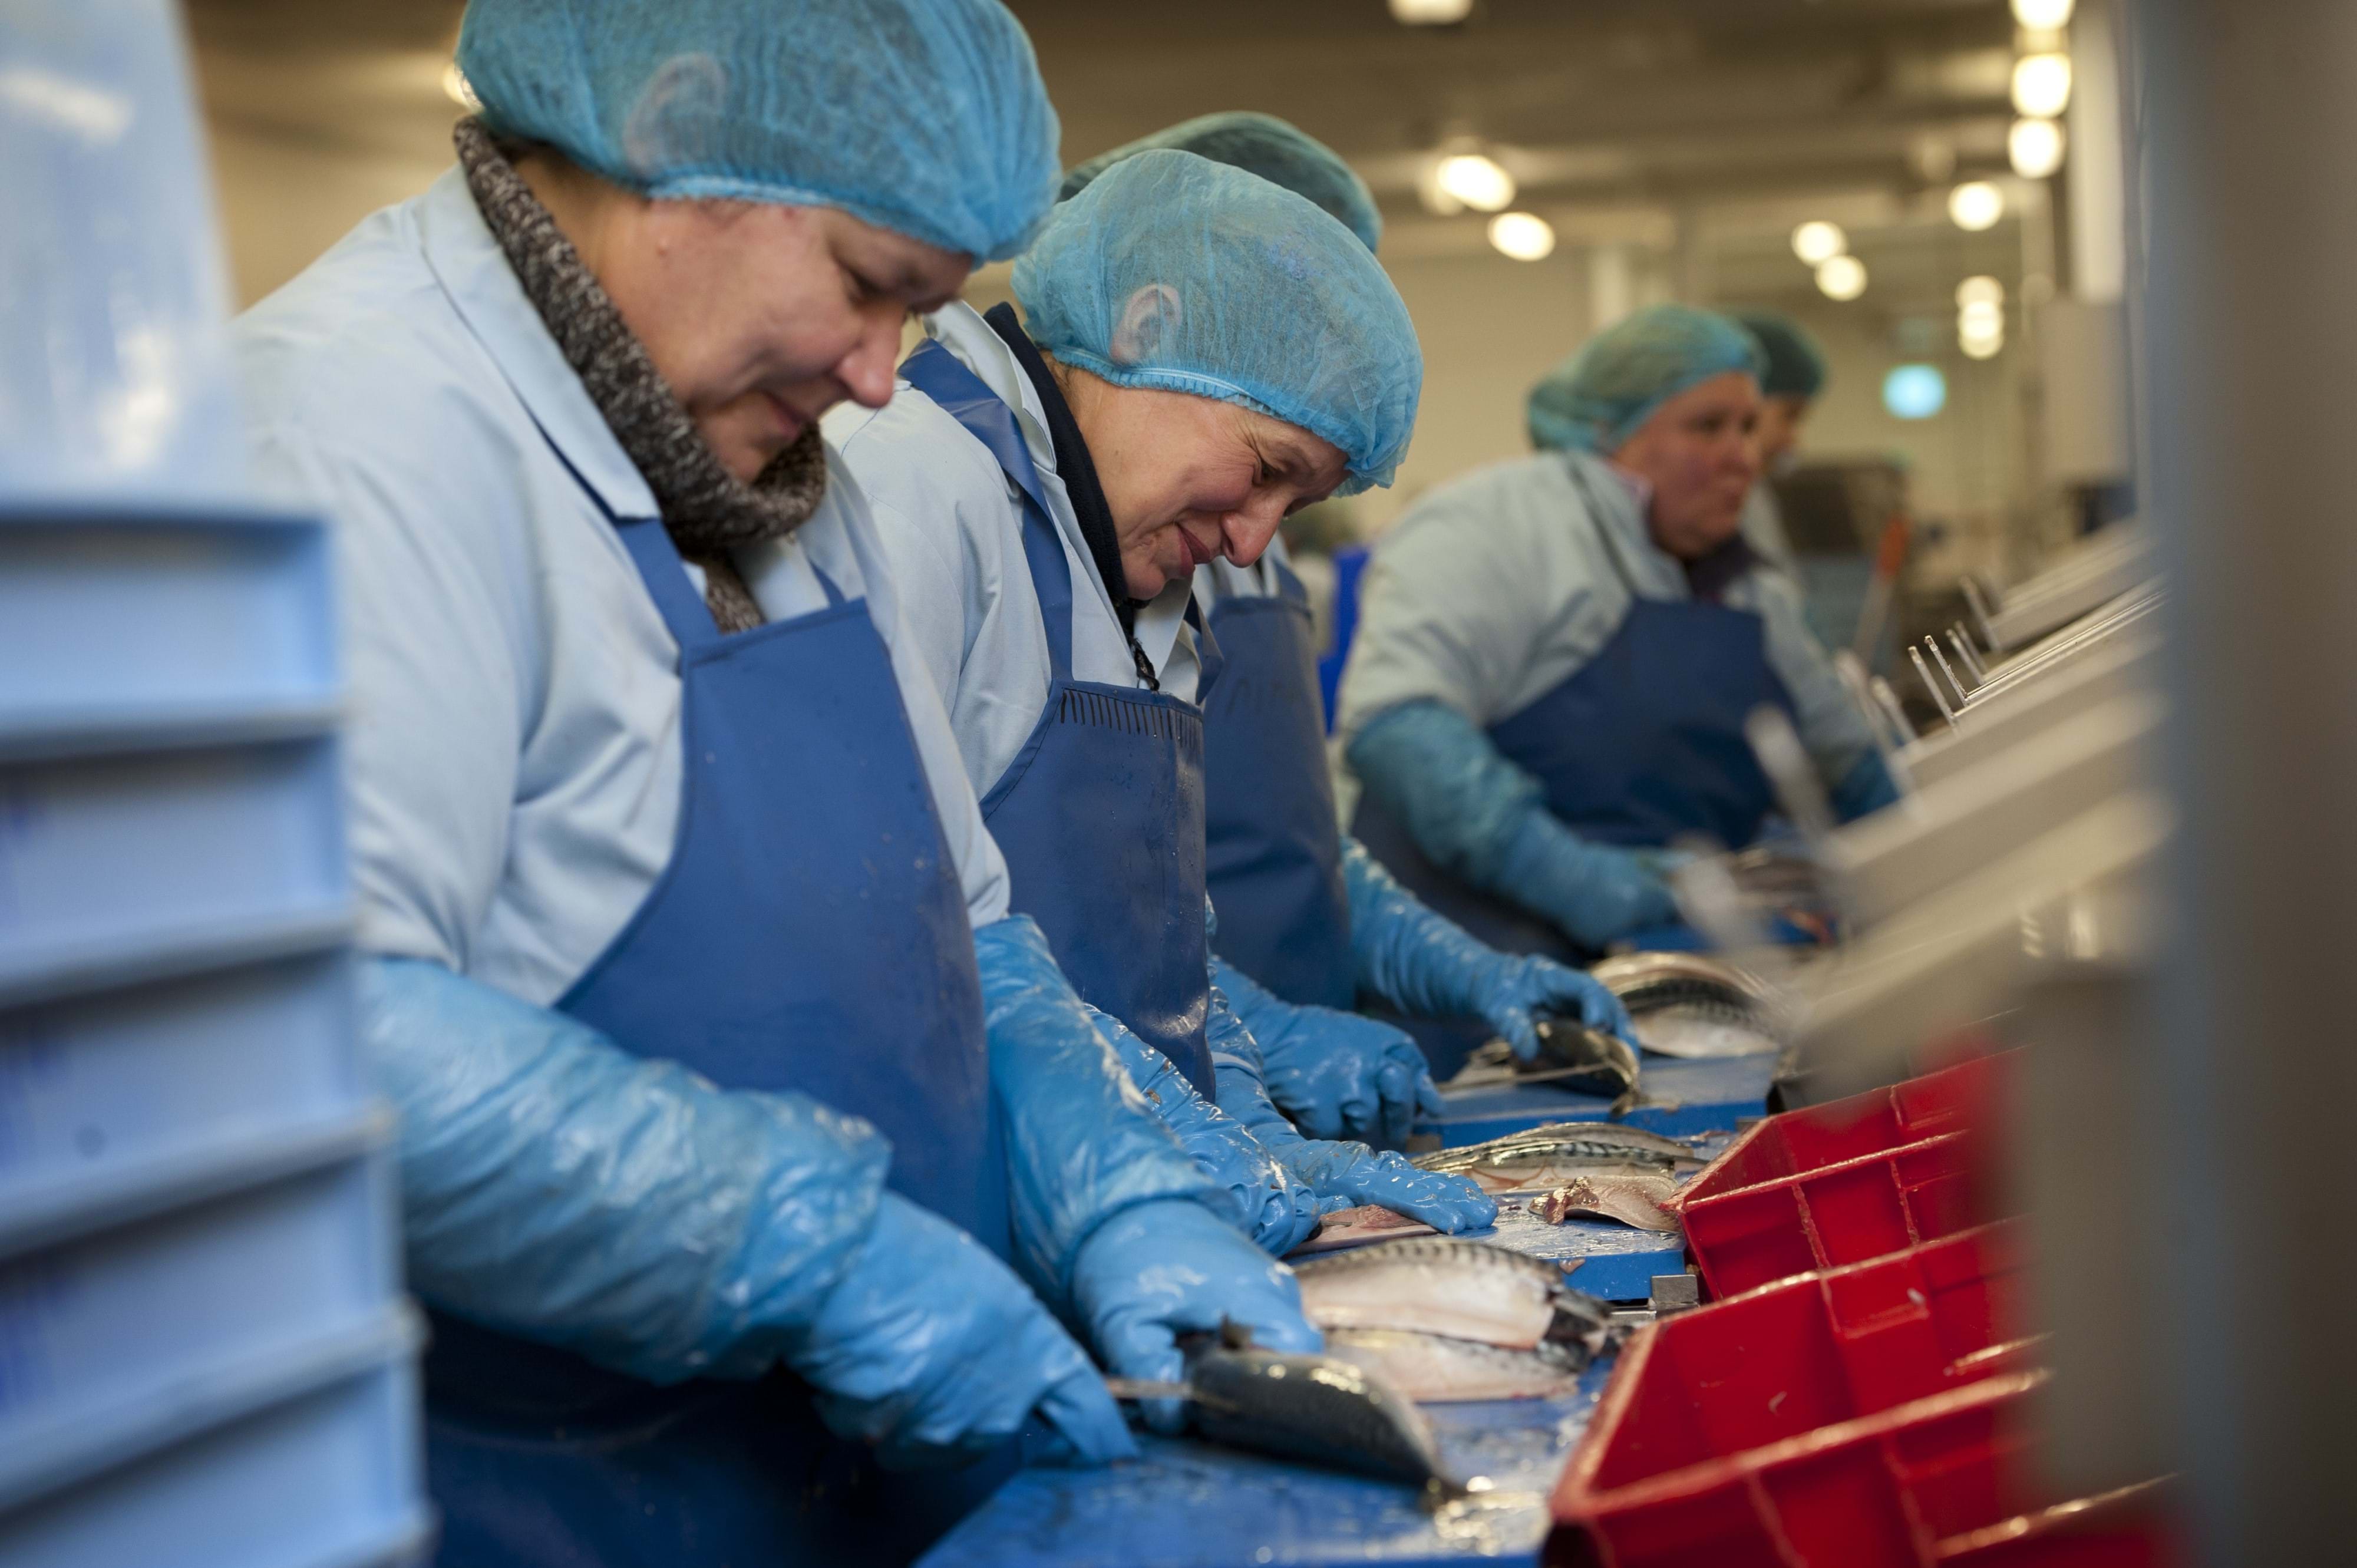 Workers filleting seafood